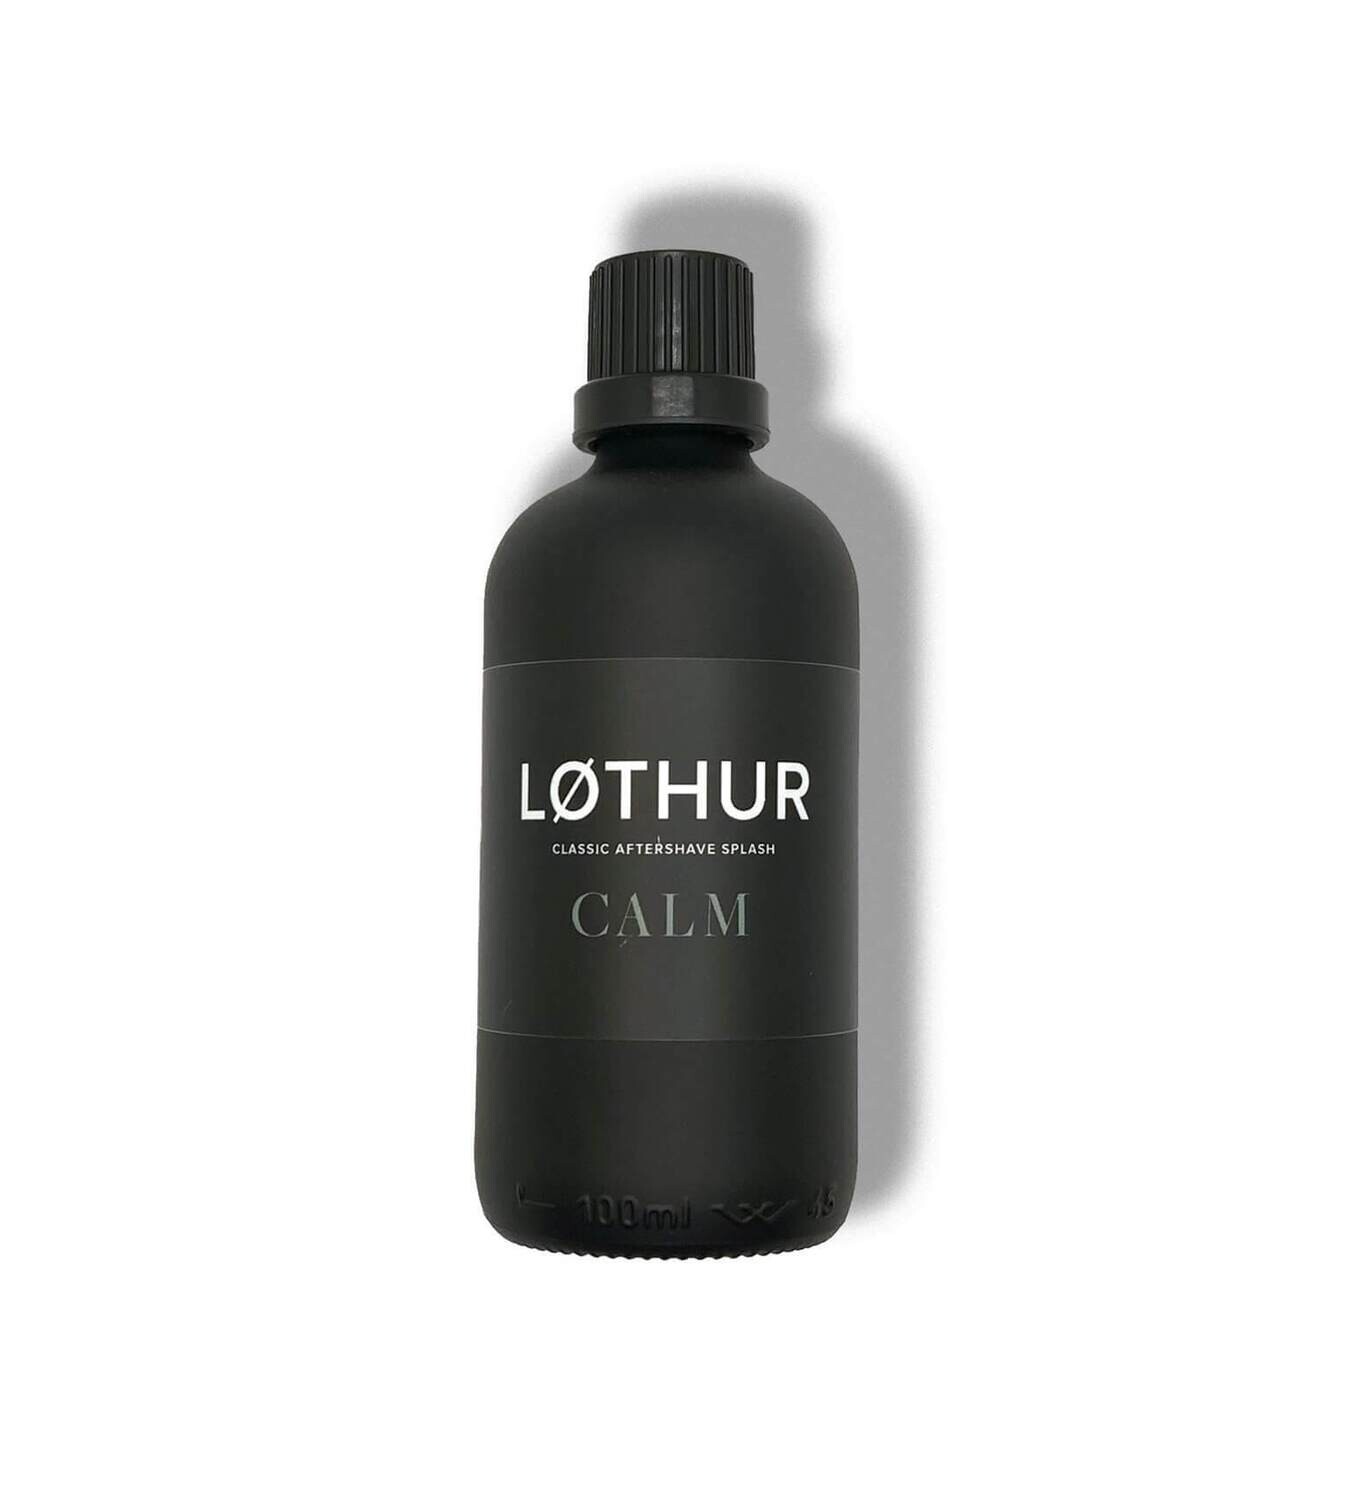 Løthur Grooming Calm Classic After Shave Splash